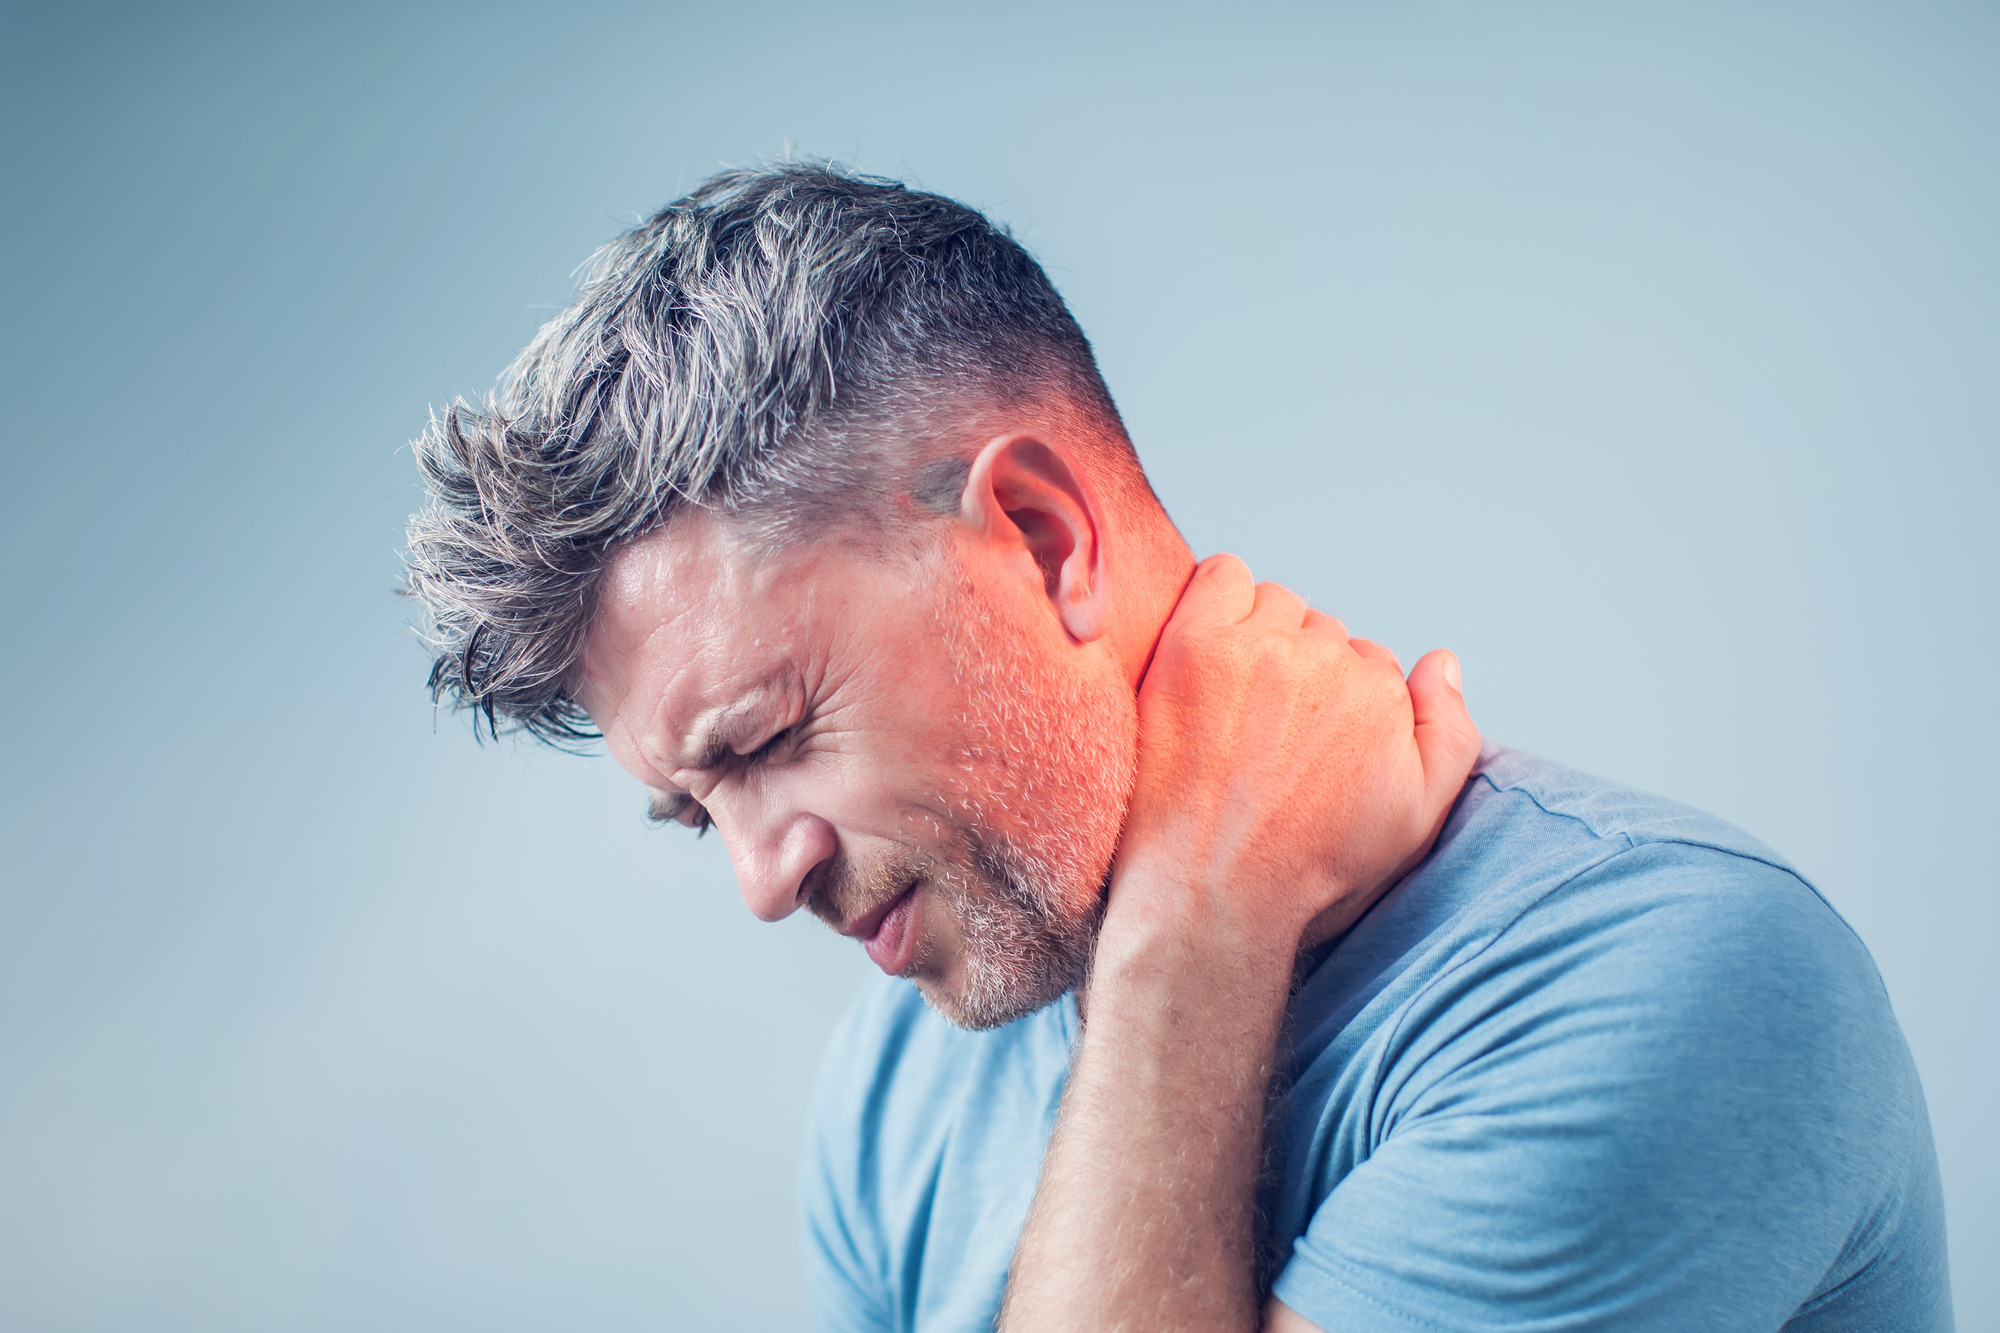 Photo of a man dealing with neck tension and pain